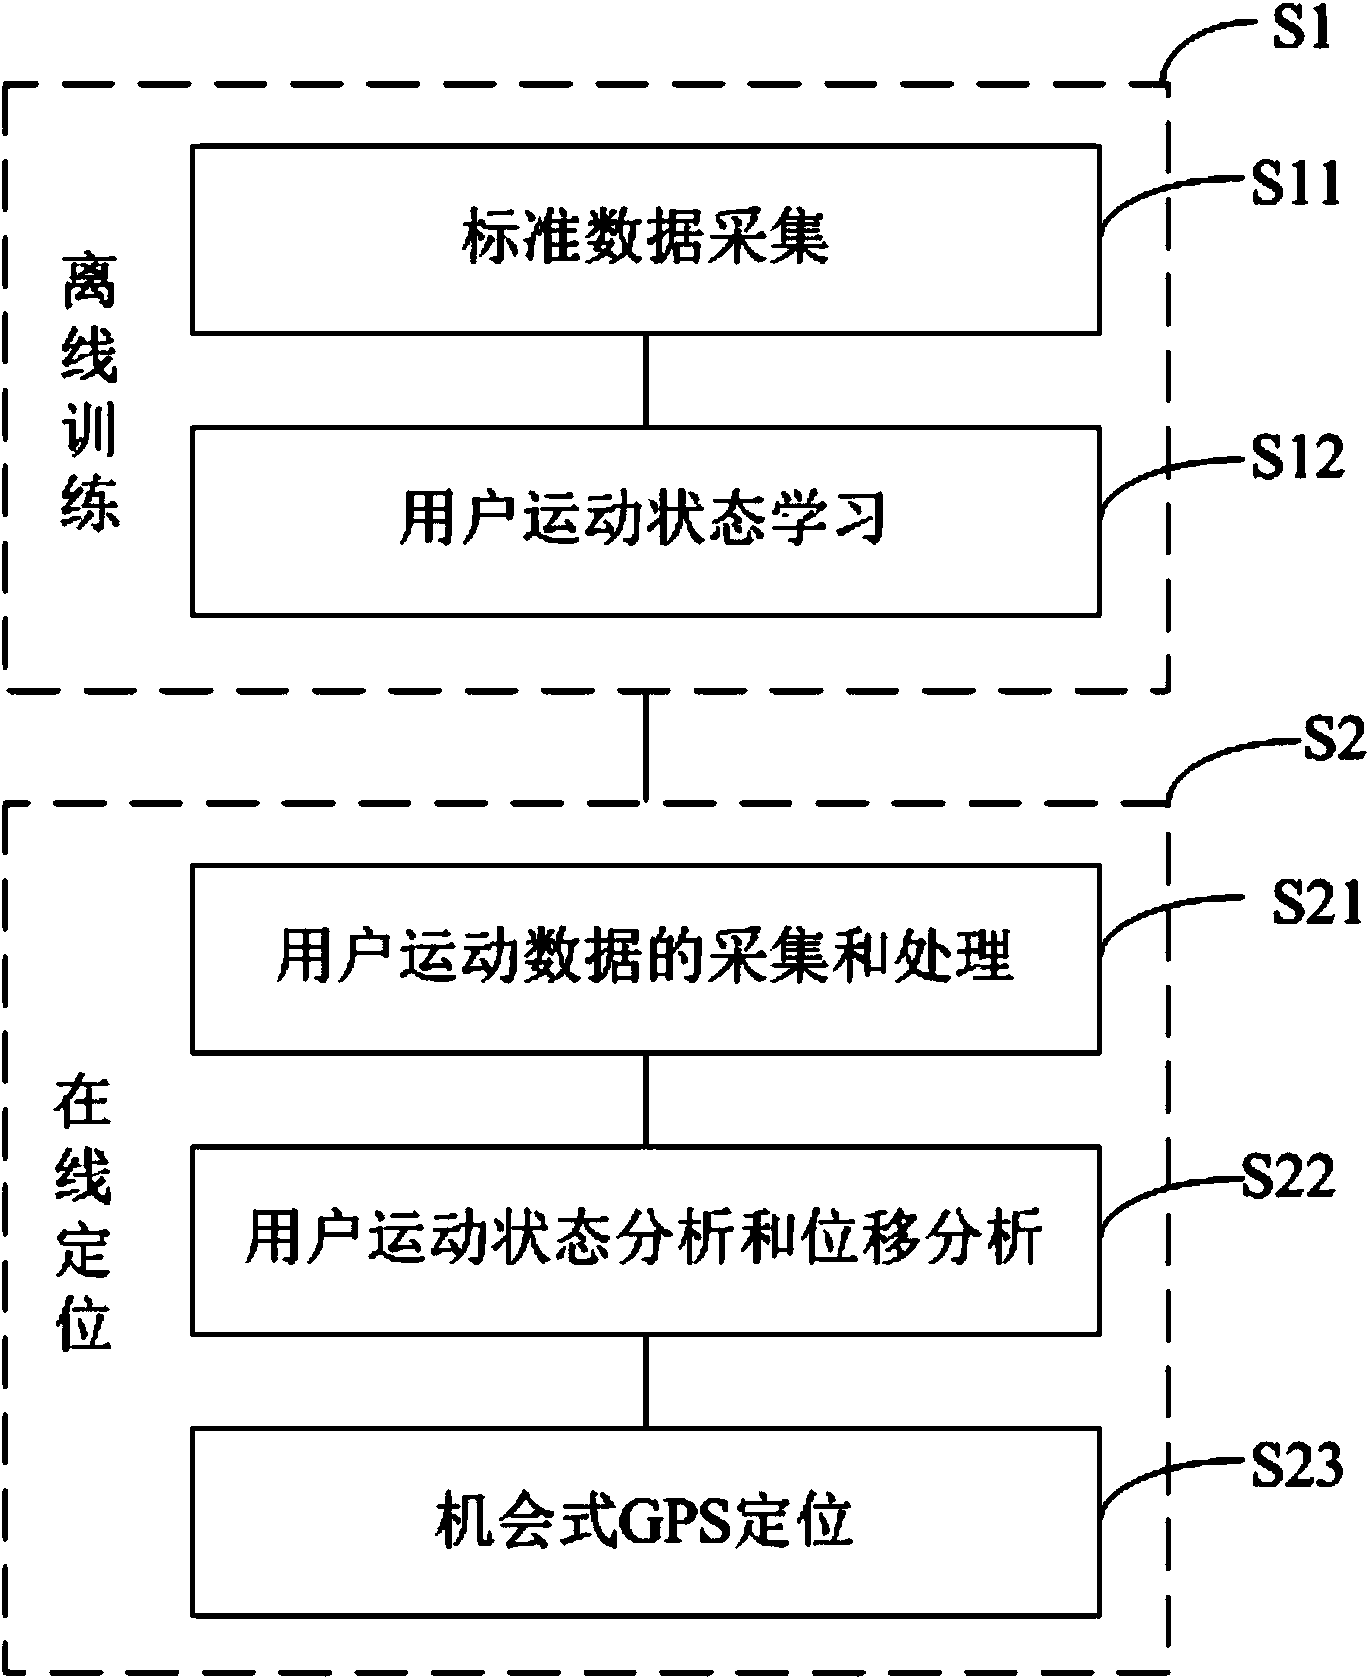 Motion state perception-based low power consumption positioning method and system